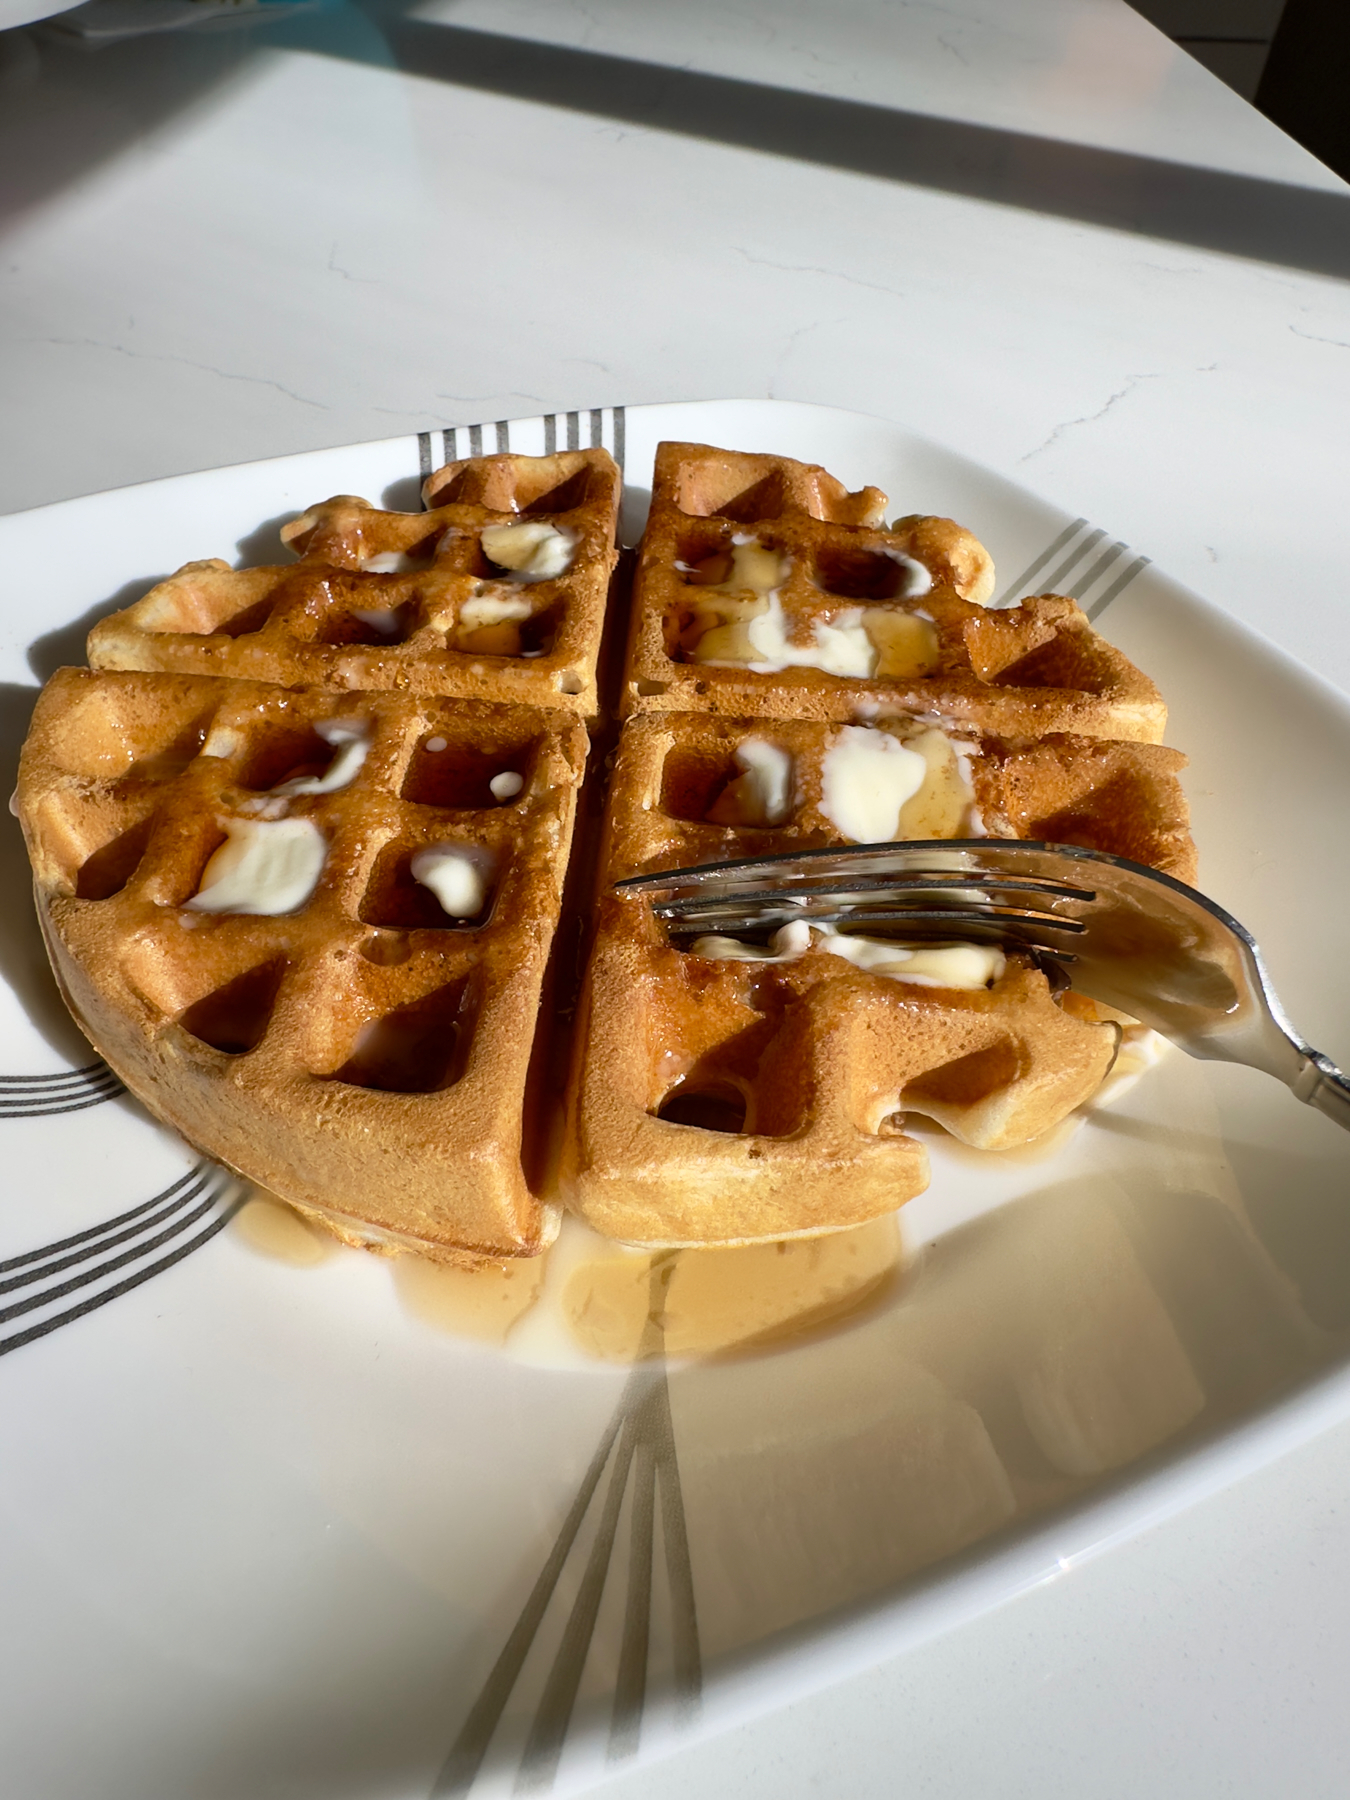 A waffle cut into quarters on a white plate, drizzled with syrup and butter, with a fork on the side.